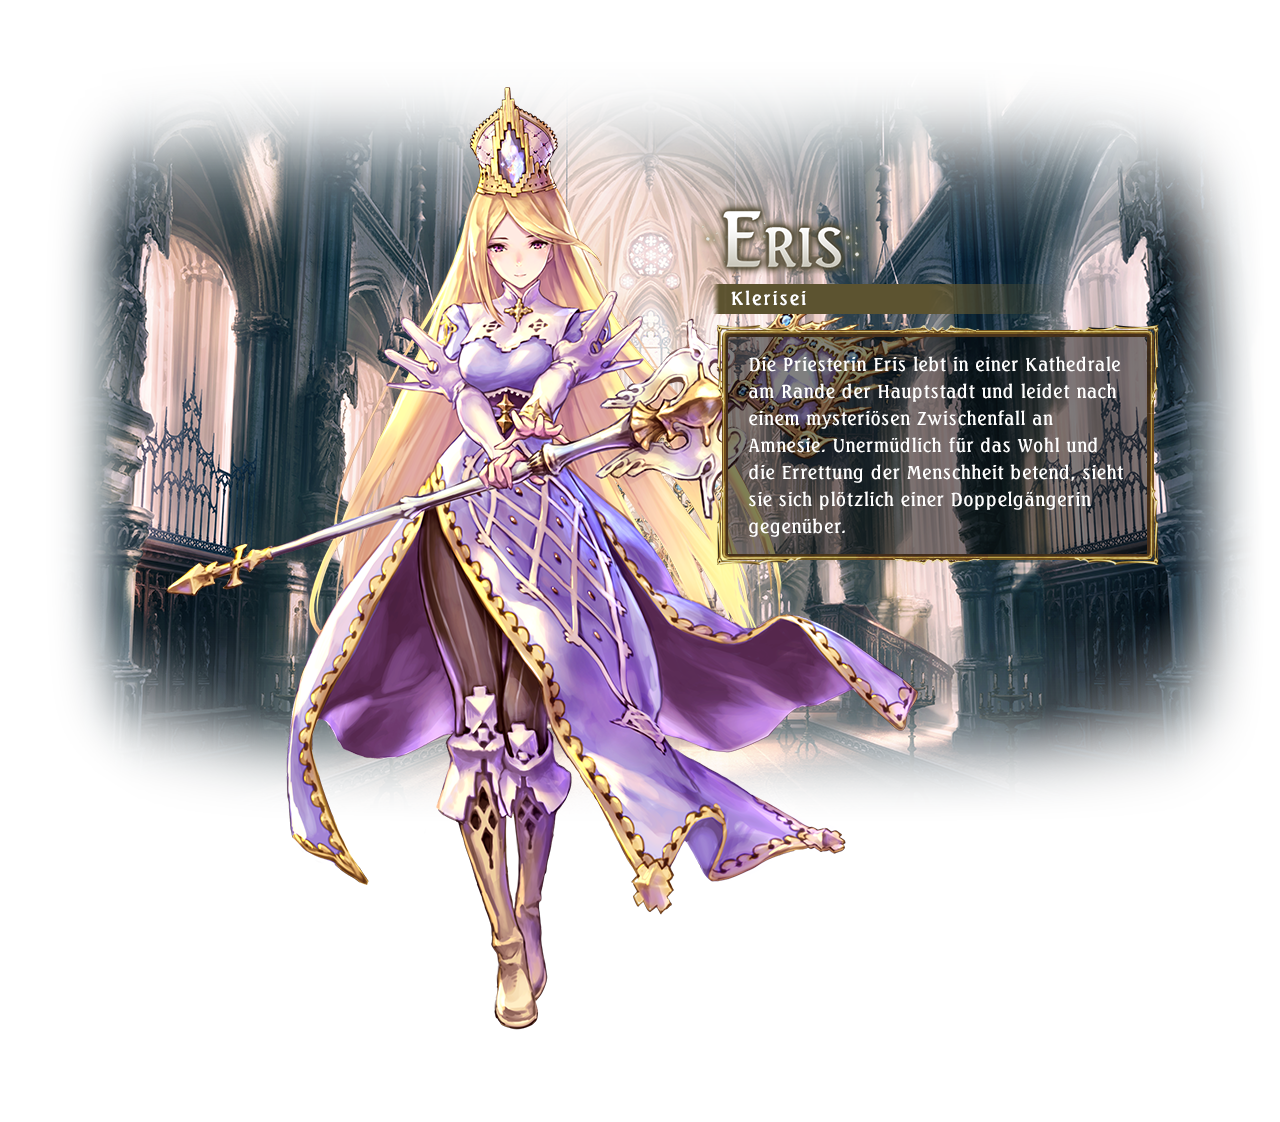 Eris / Class: Havencraft / Eris is a high priestess who works tirelessly to ease the suffering of humanity. She continues to serve despite having lost her memories when a familiar face appears.